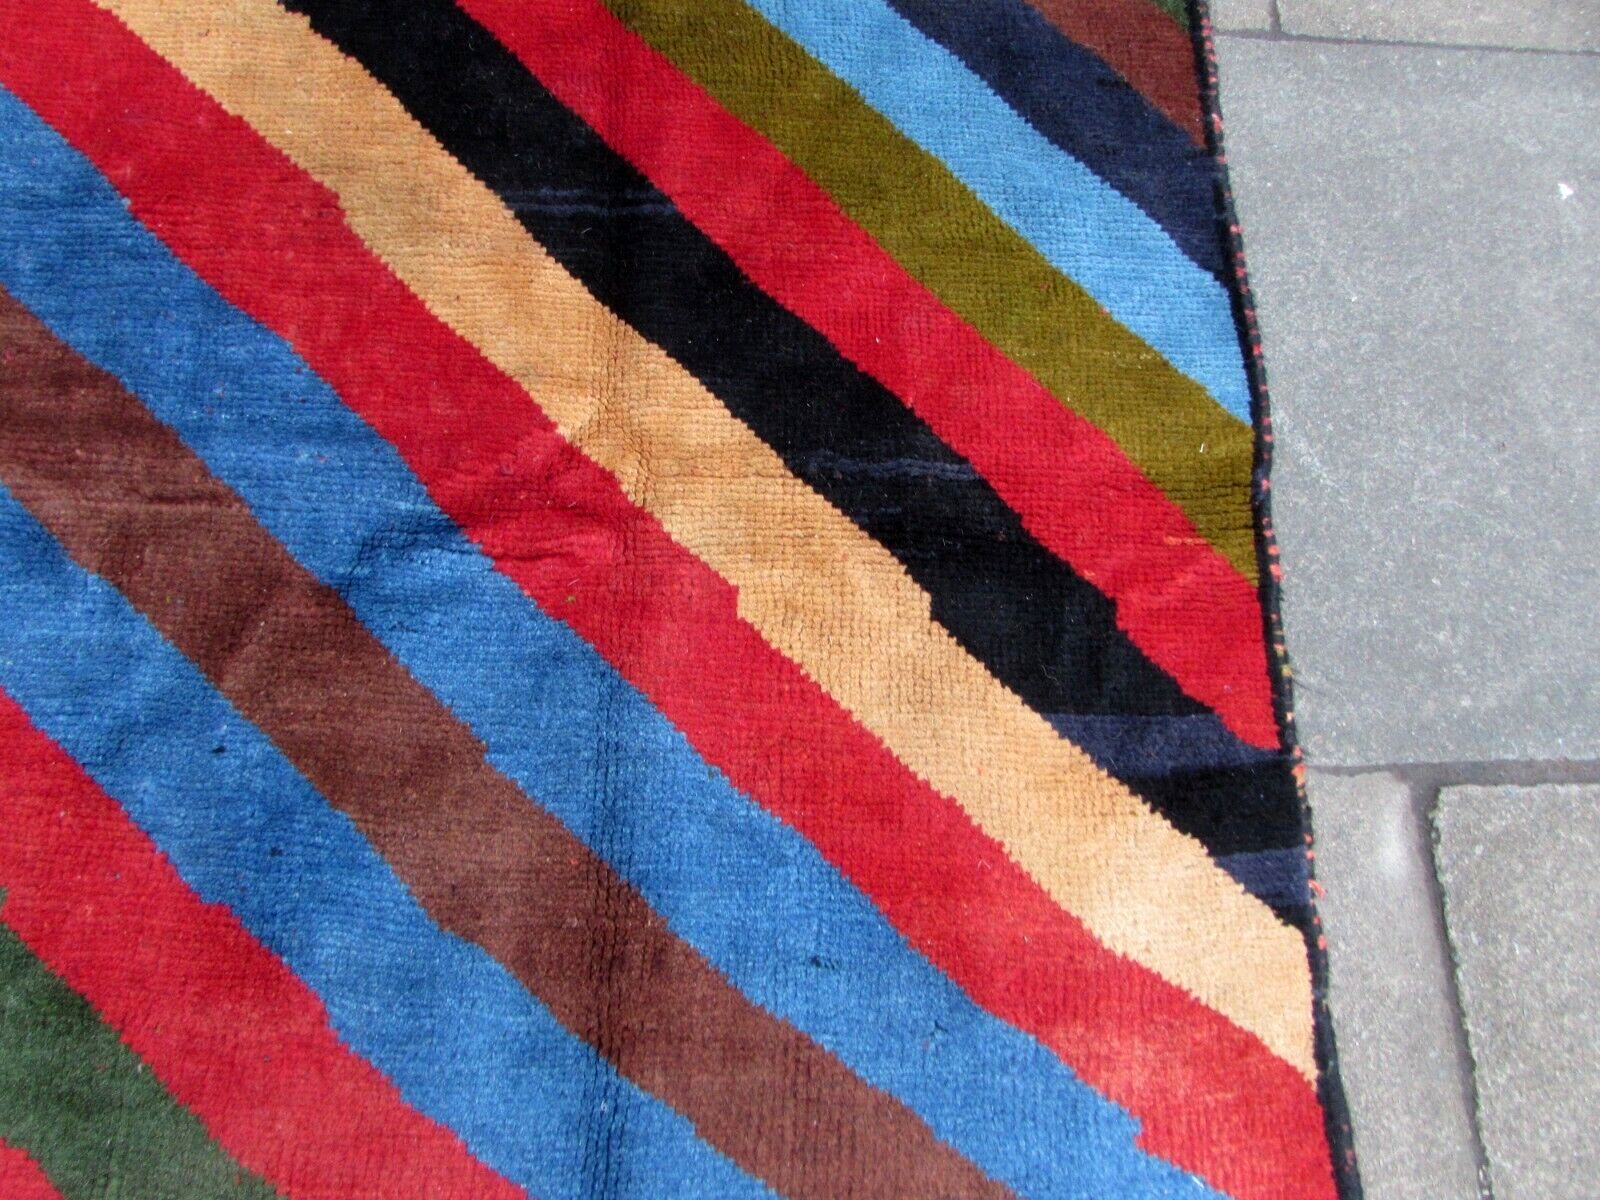 Handmade vintage Persian Gabbeh rug in colorful geometric striped design. The rug is from the end of 20th century in original good condition.